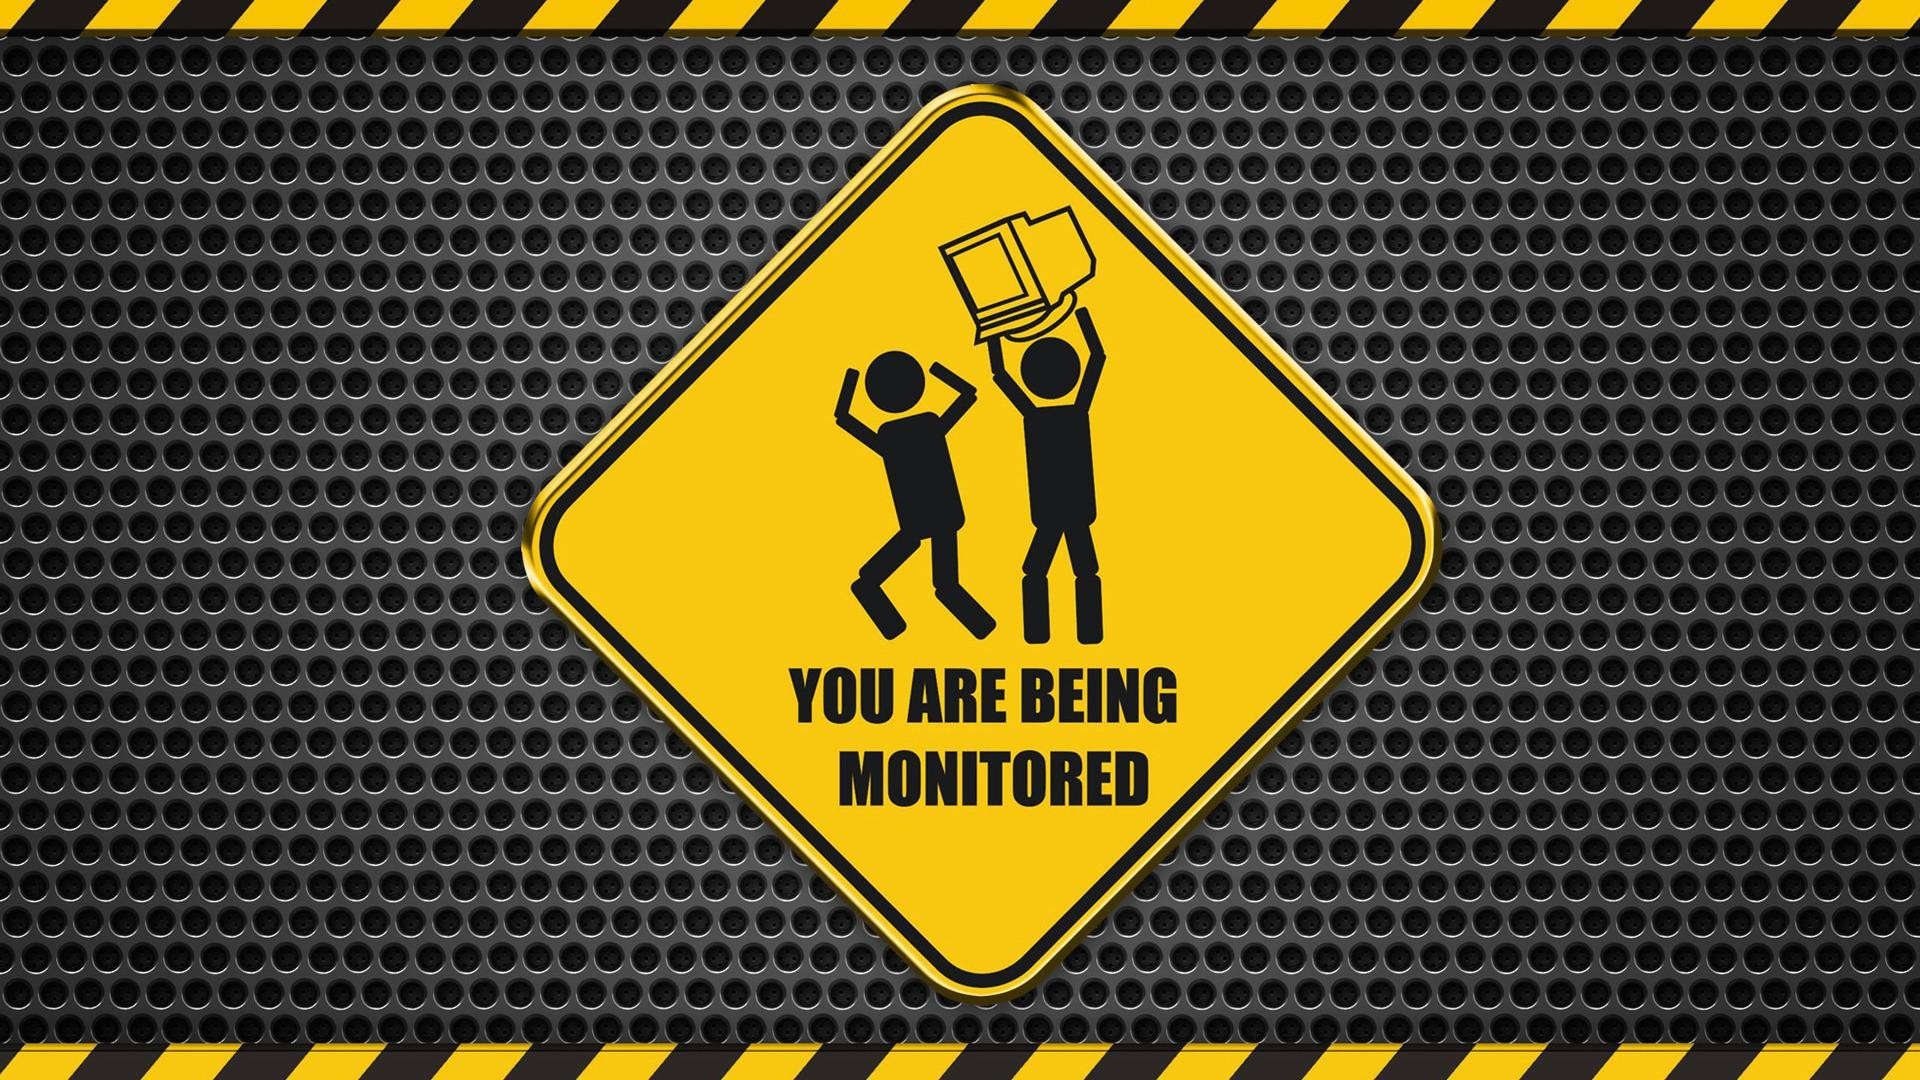 General 1920x1080 caution yellow PC gaming computer humor sign